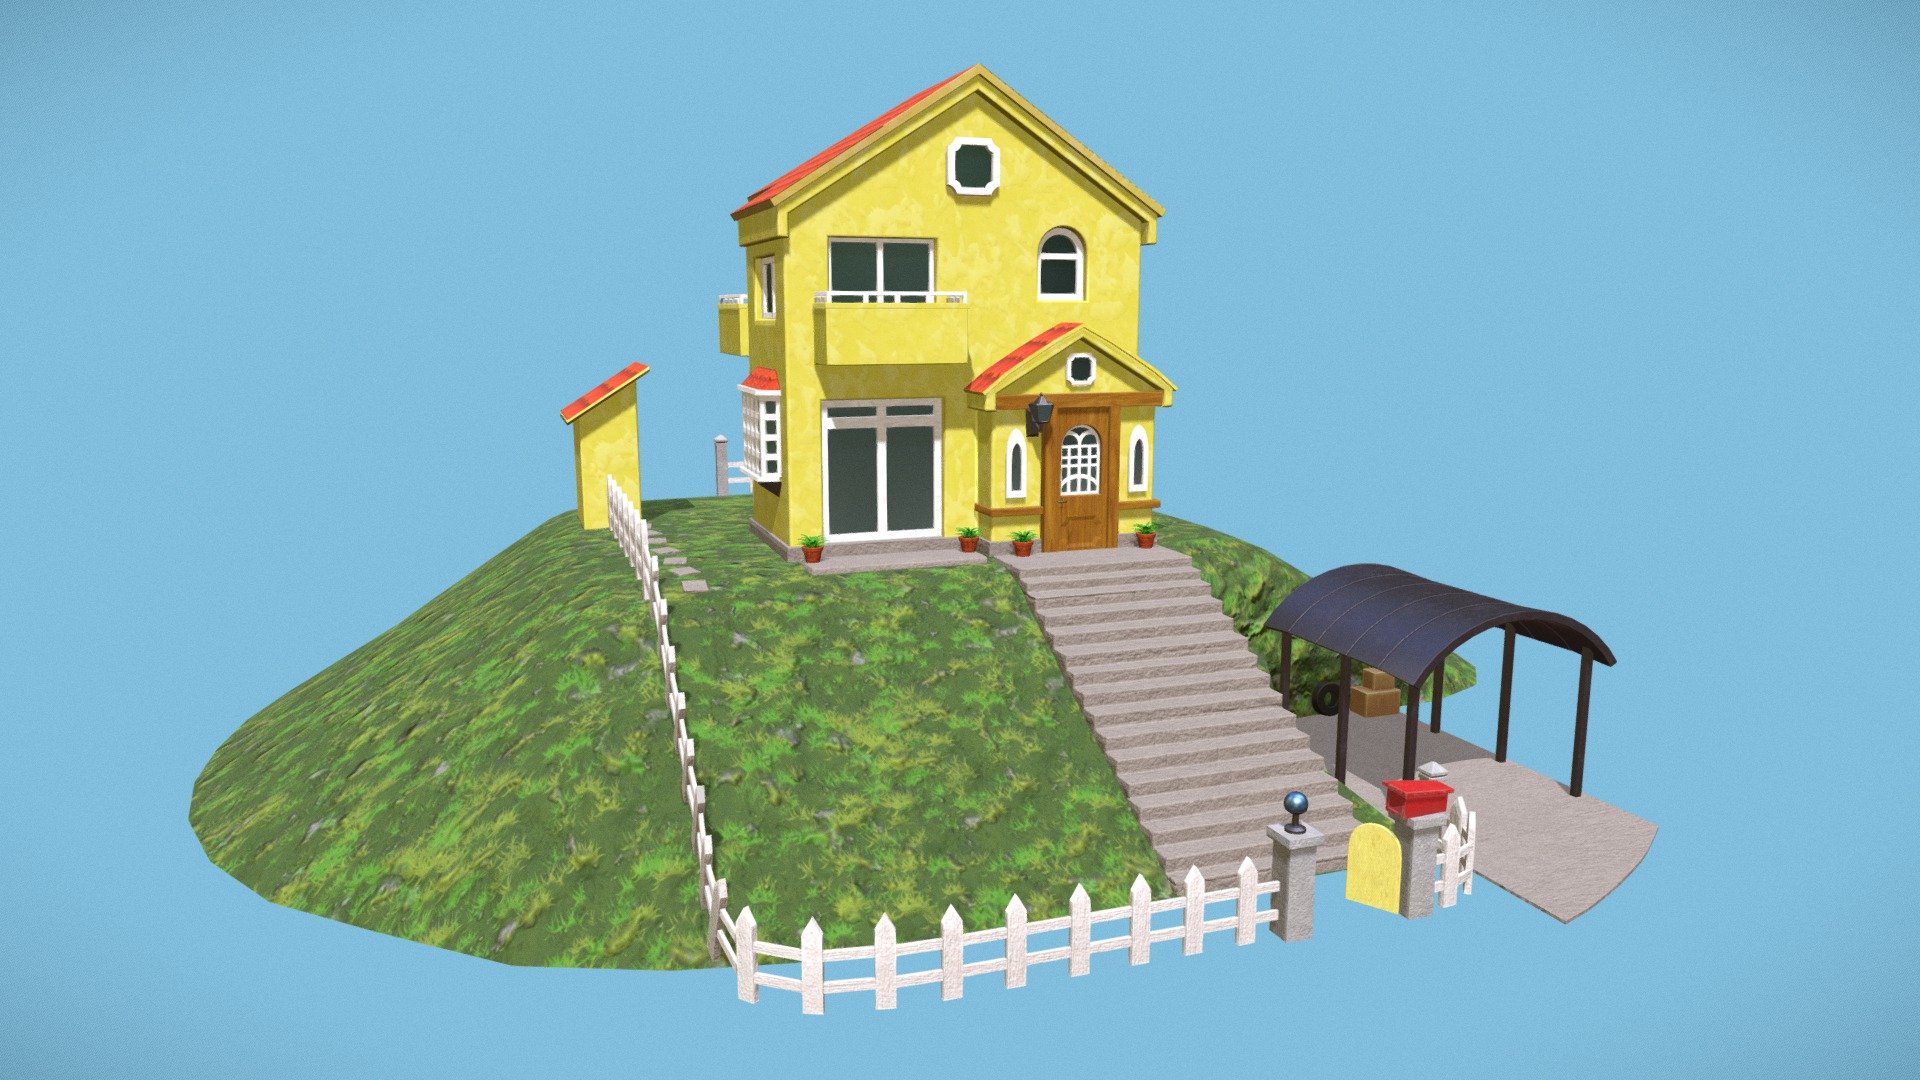 House on the Cliff by the Sea - Ponyo